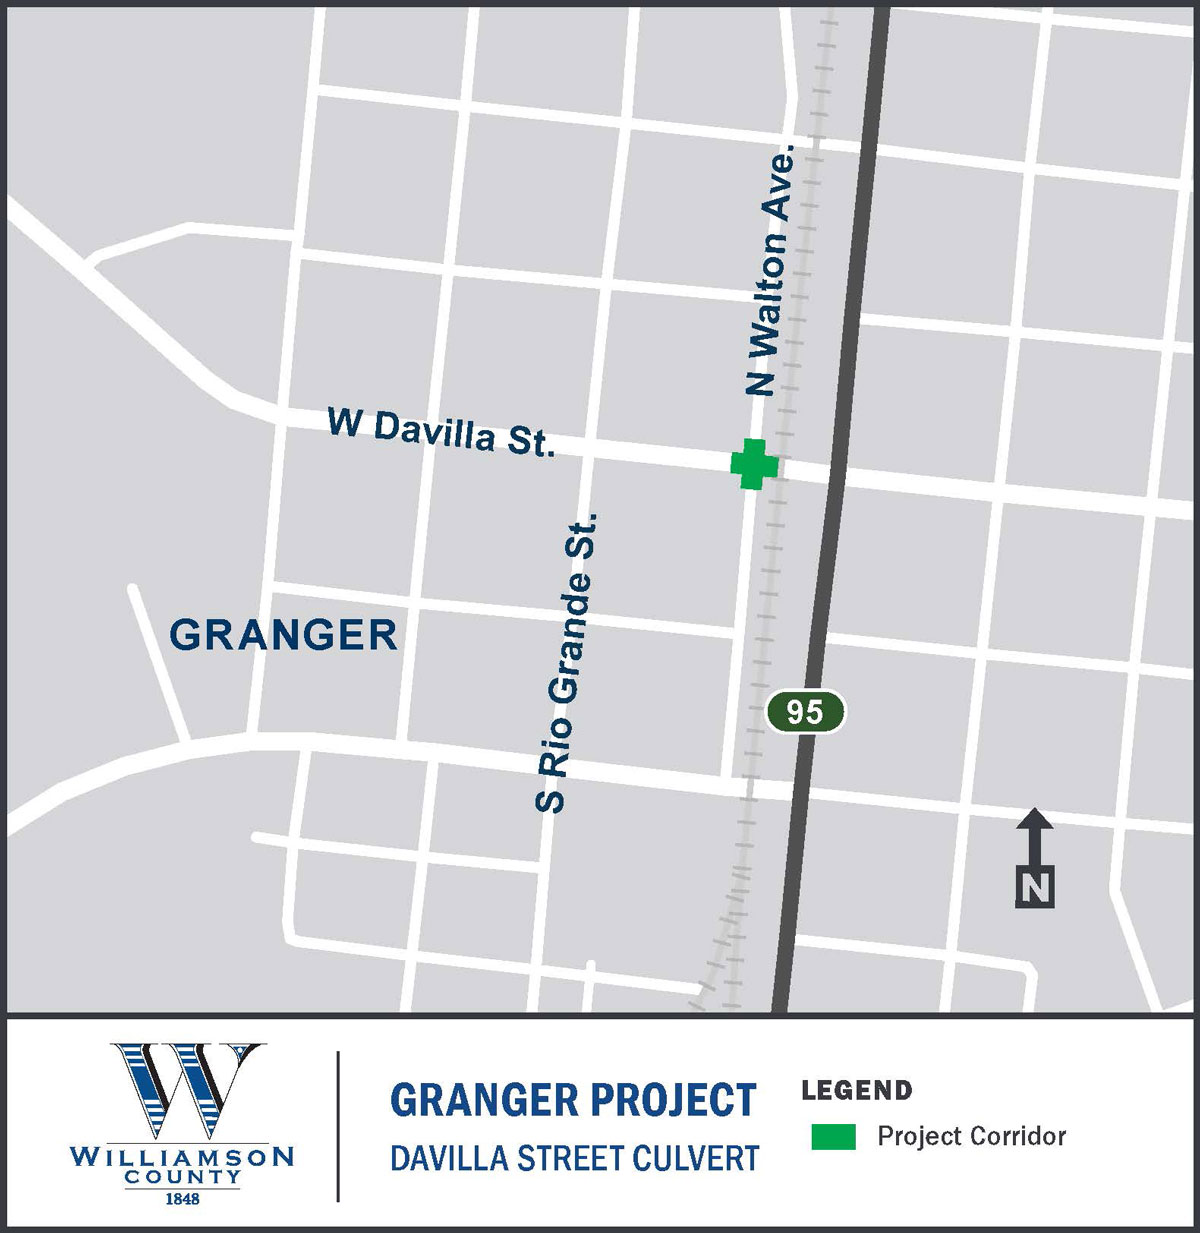 Map for the Granger Project